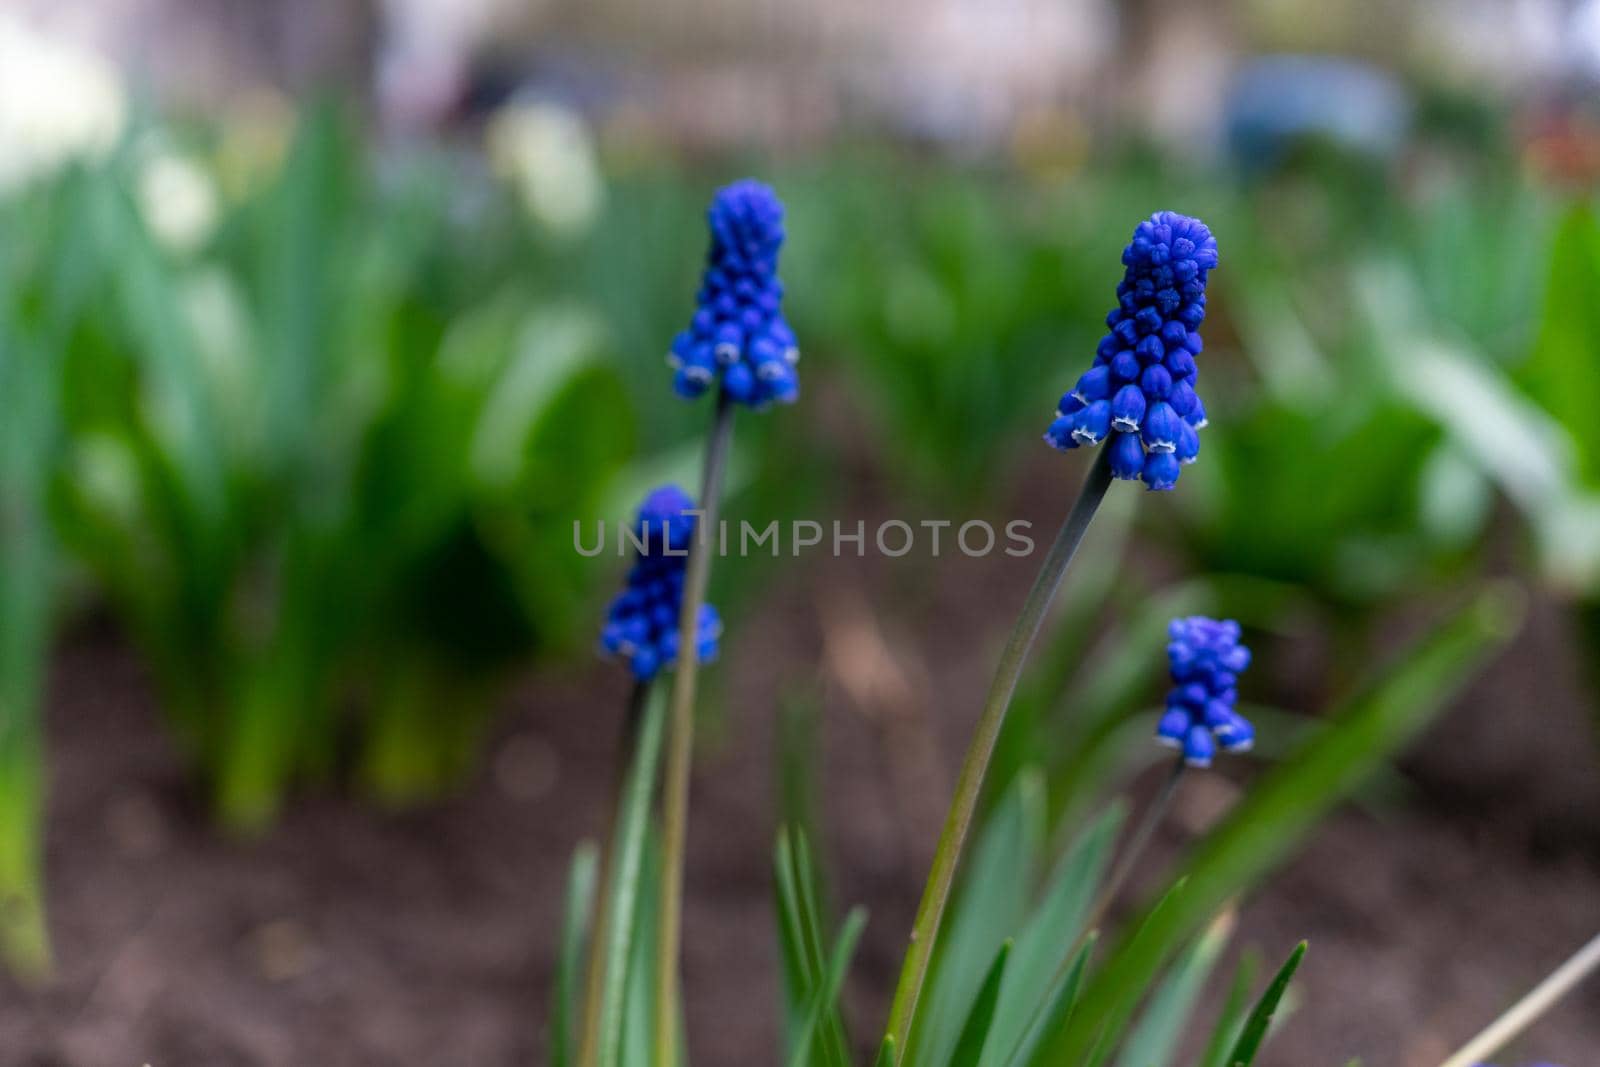 Grape hyacinth photographed close up on a flowerbed.